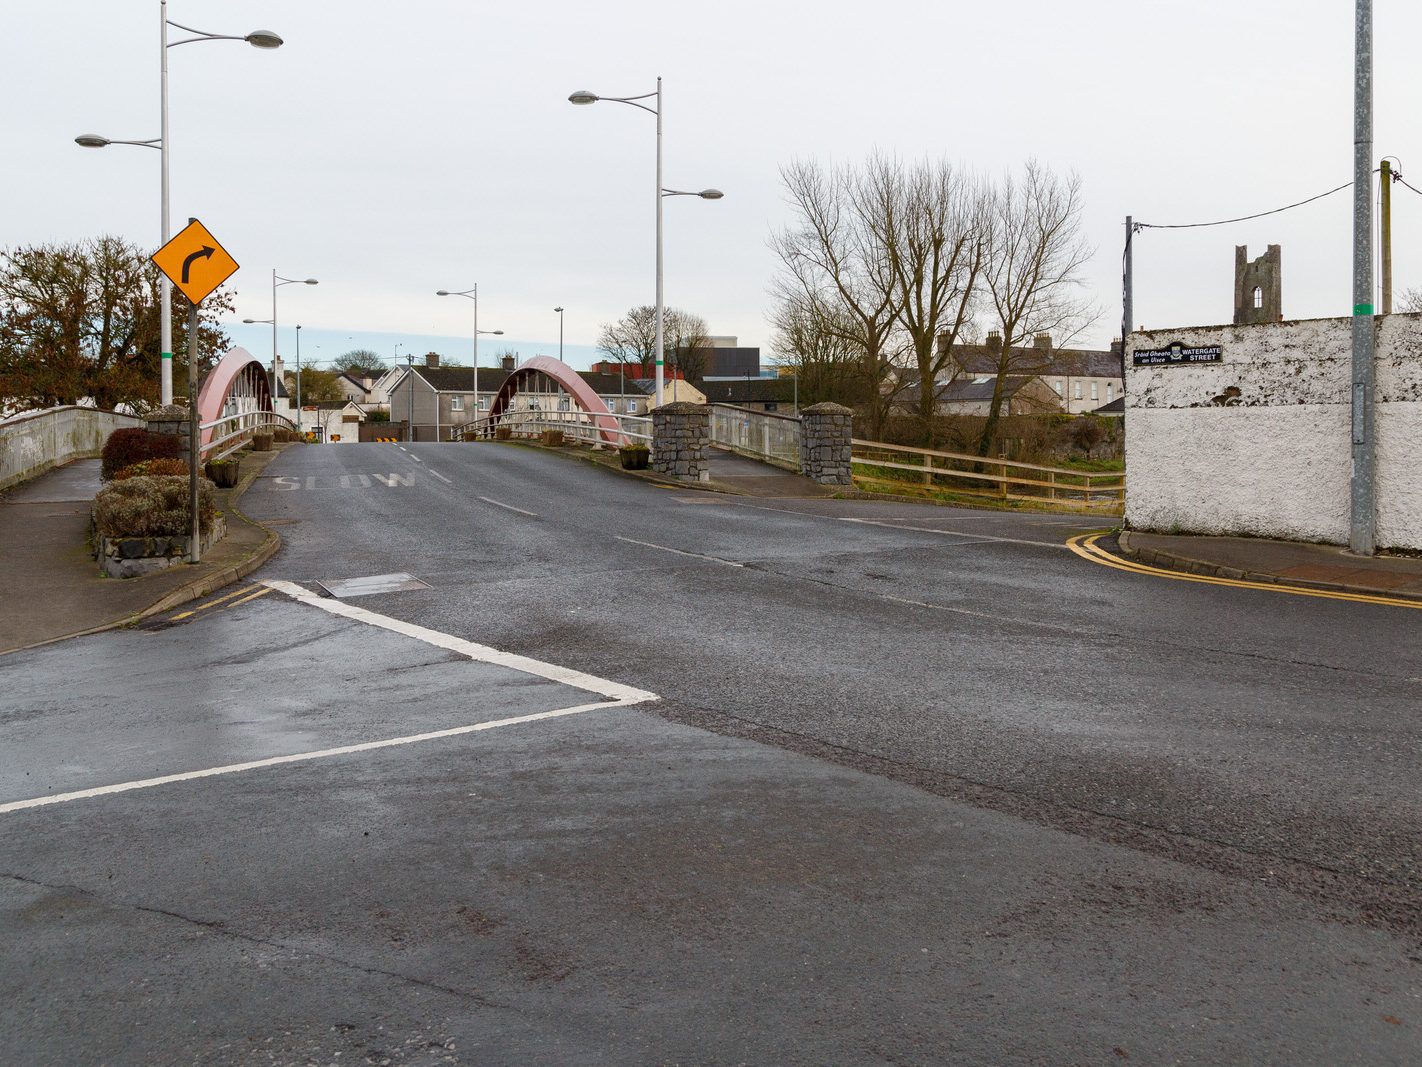 WATERGATE STREET AND WATERGATE BRIDGE [THE TOWN OF TRIM IN COUNTY MEATH]-226462-1